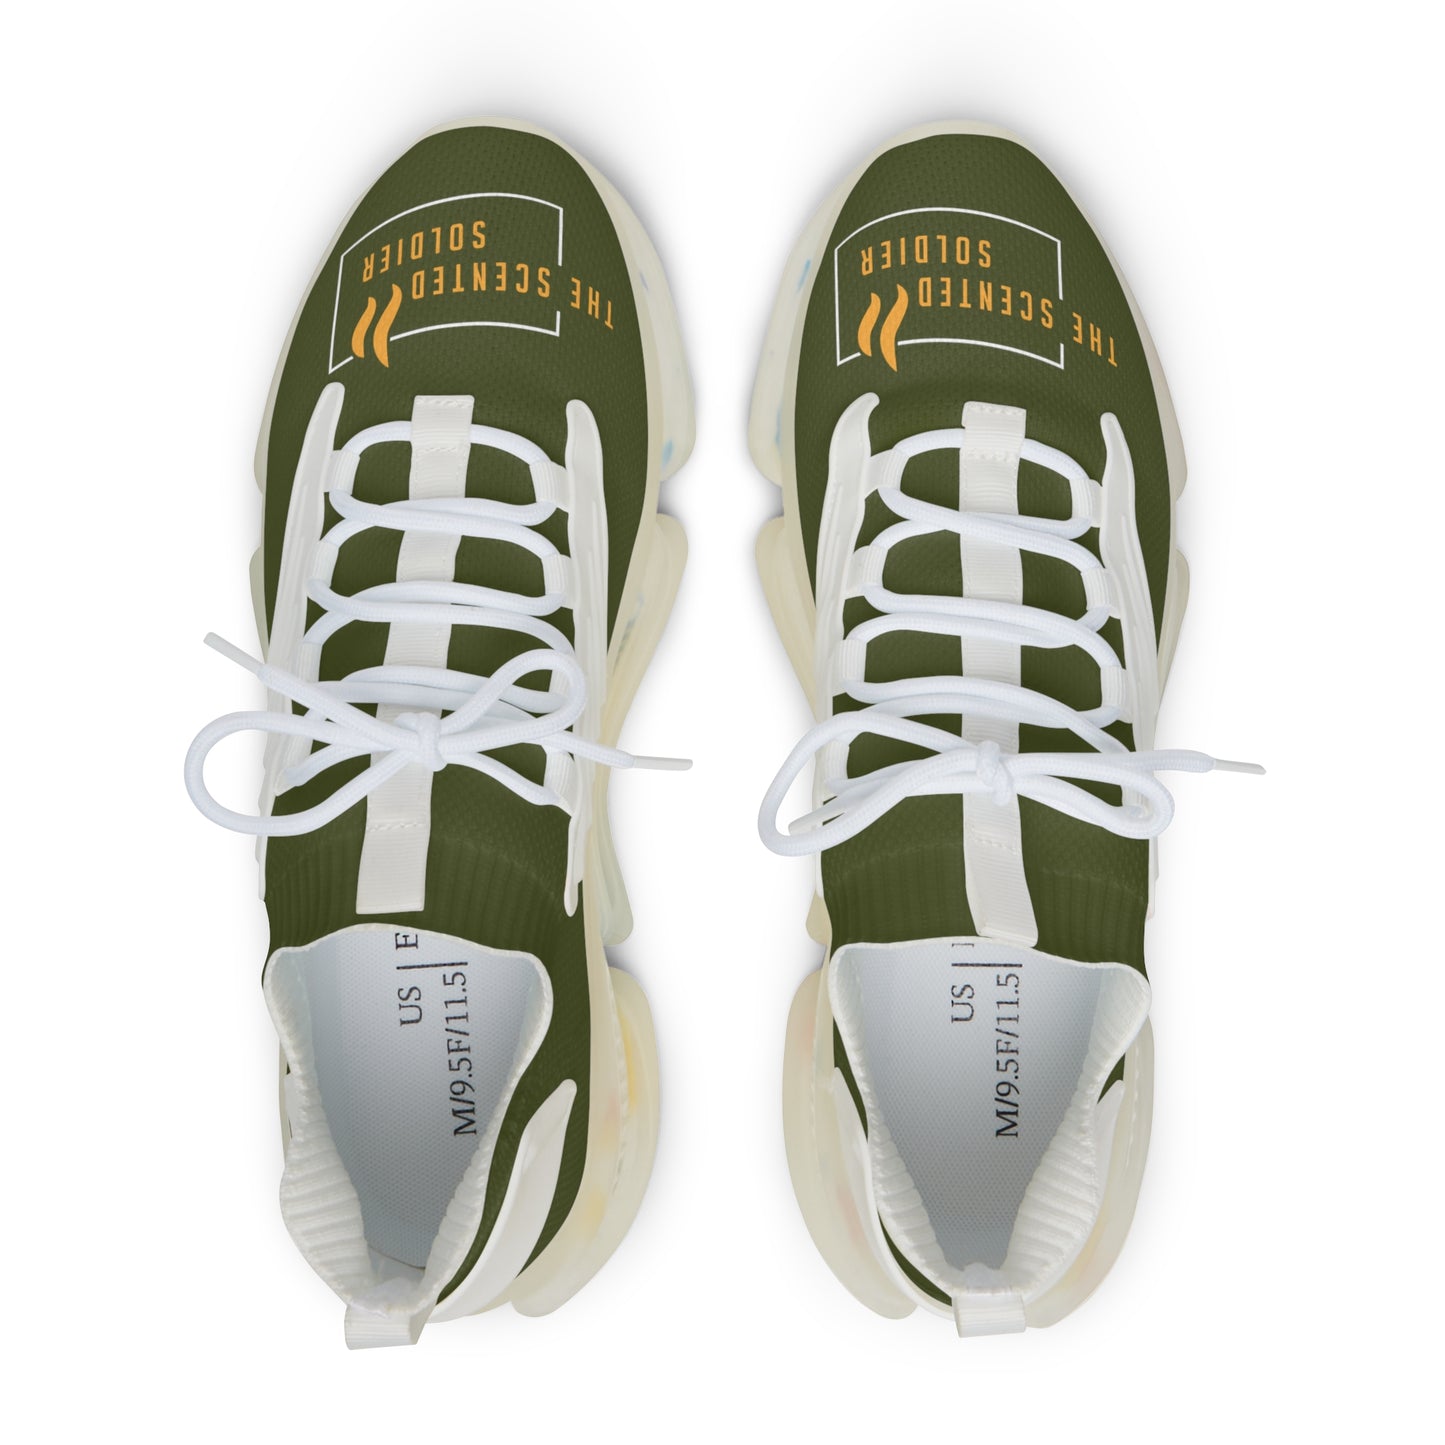 The Scented Soldier Men's Mesh Sneakers